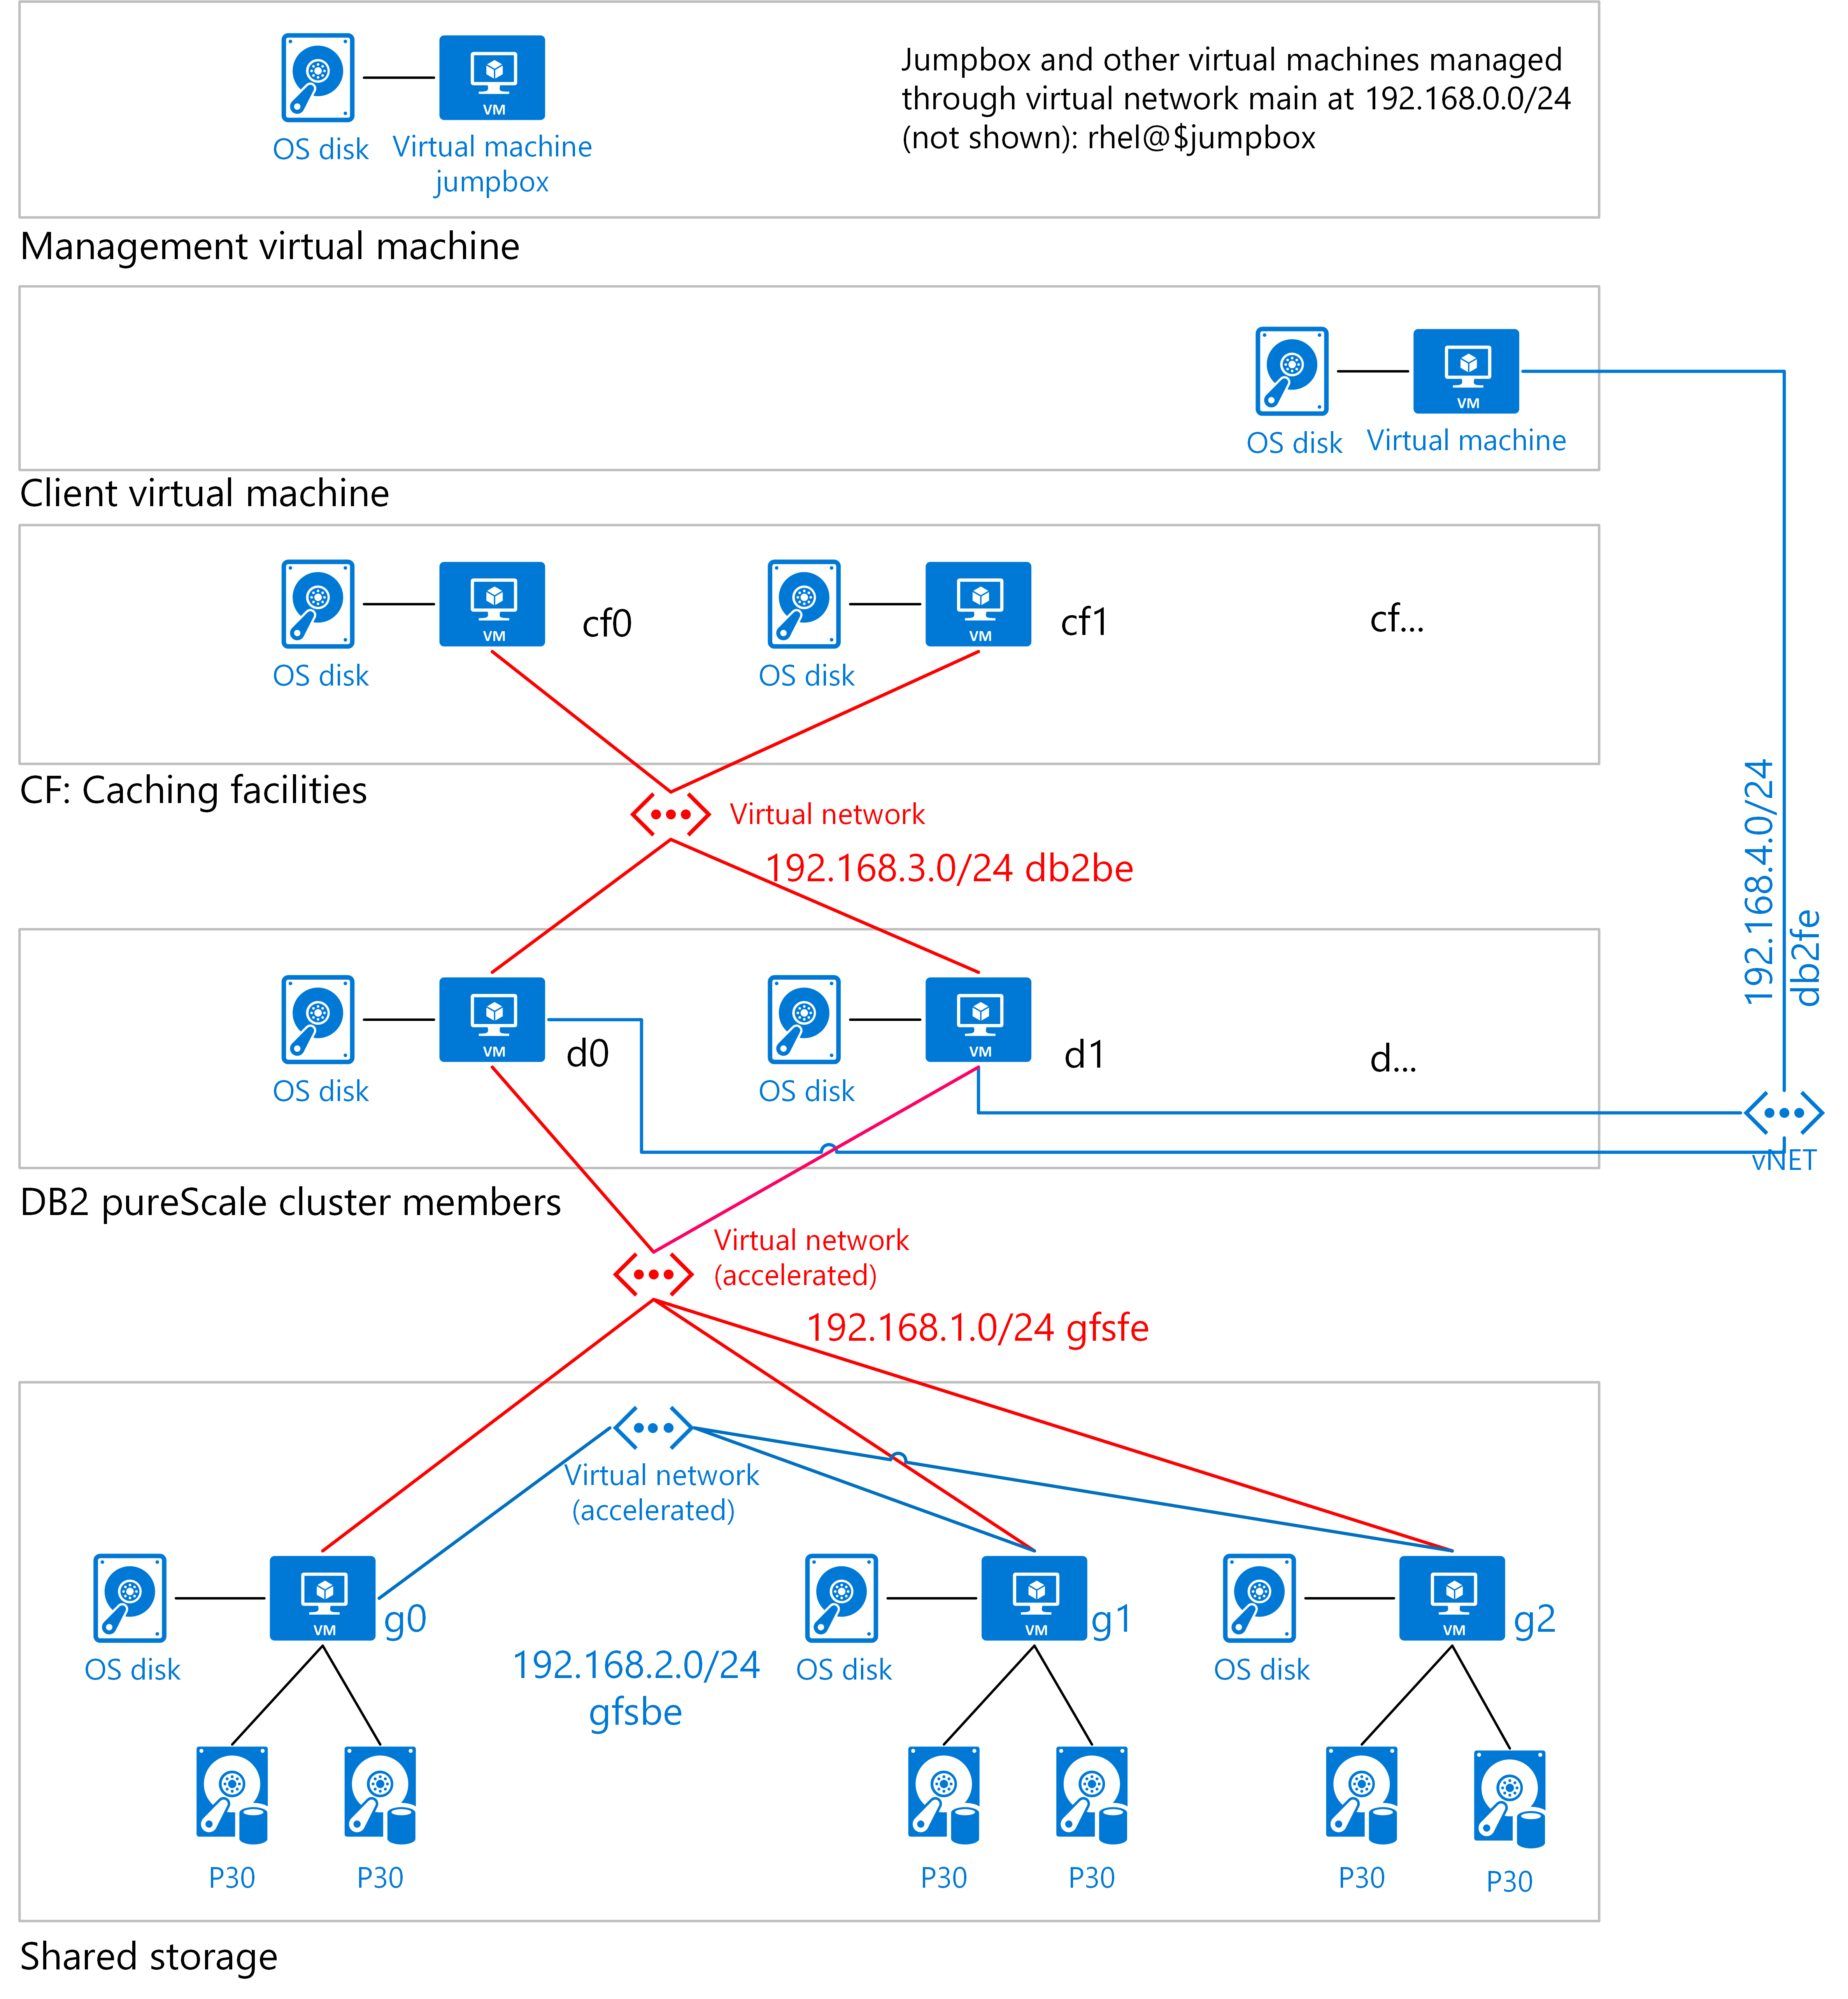 DB2 pureScale on Azure virtual machines showing storage and networking